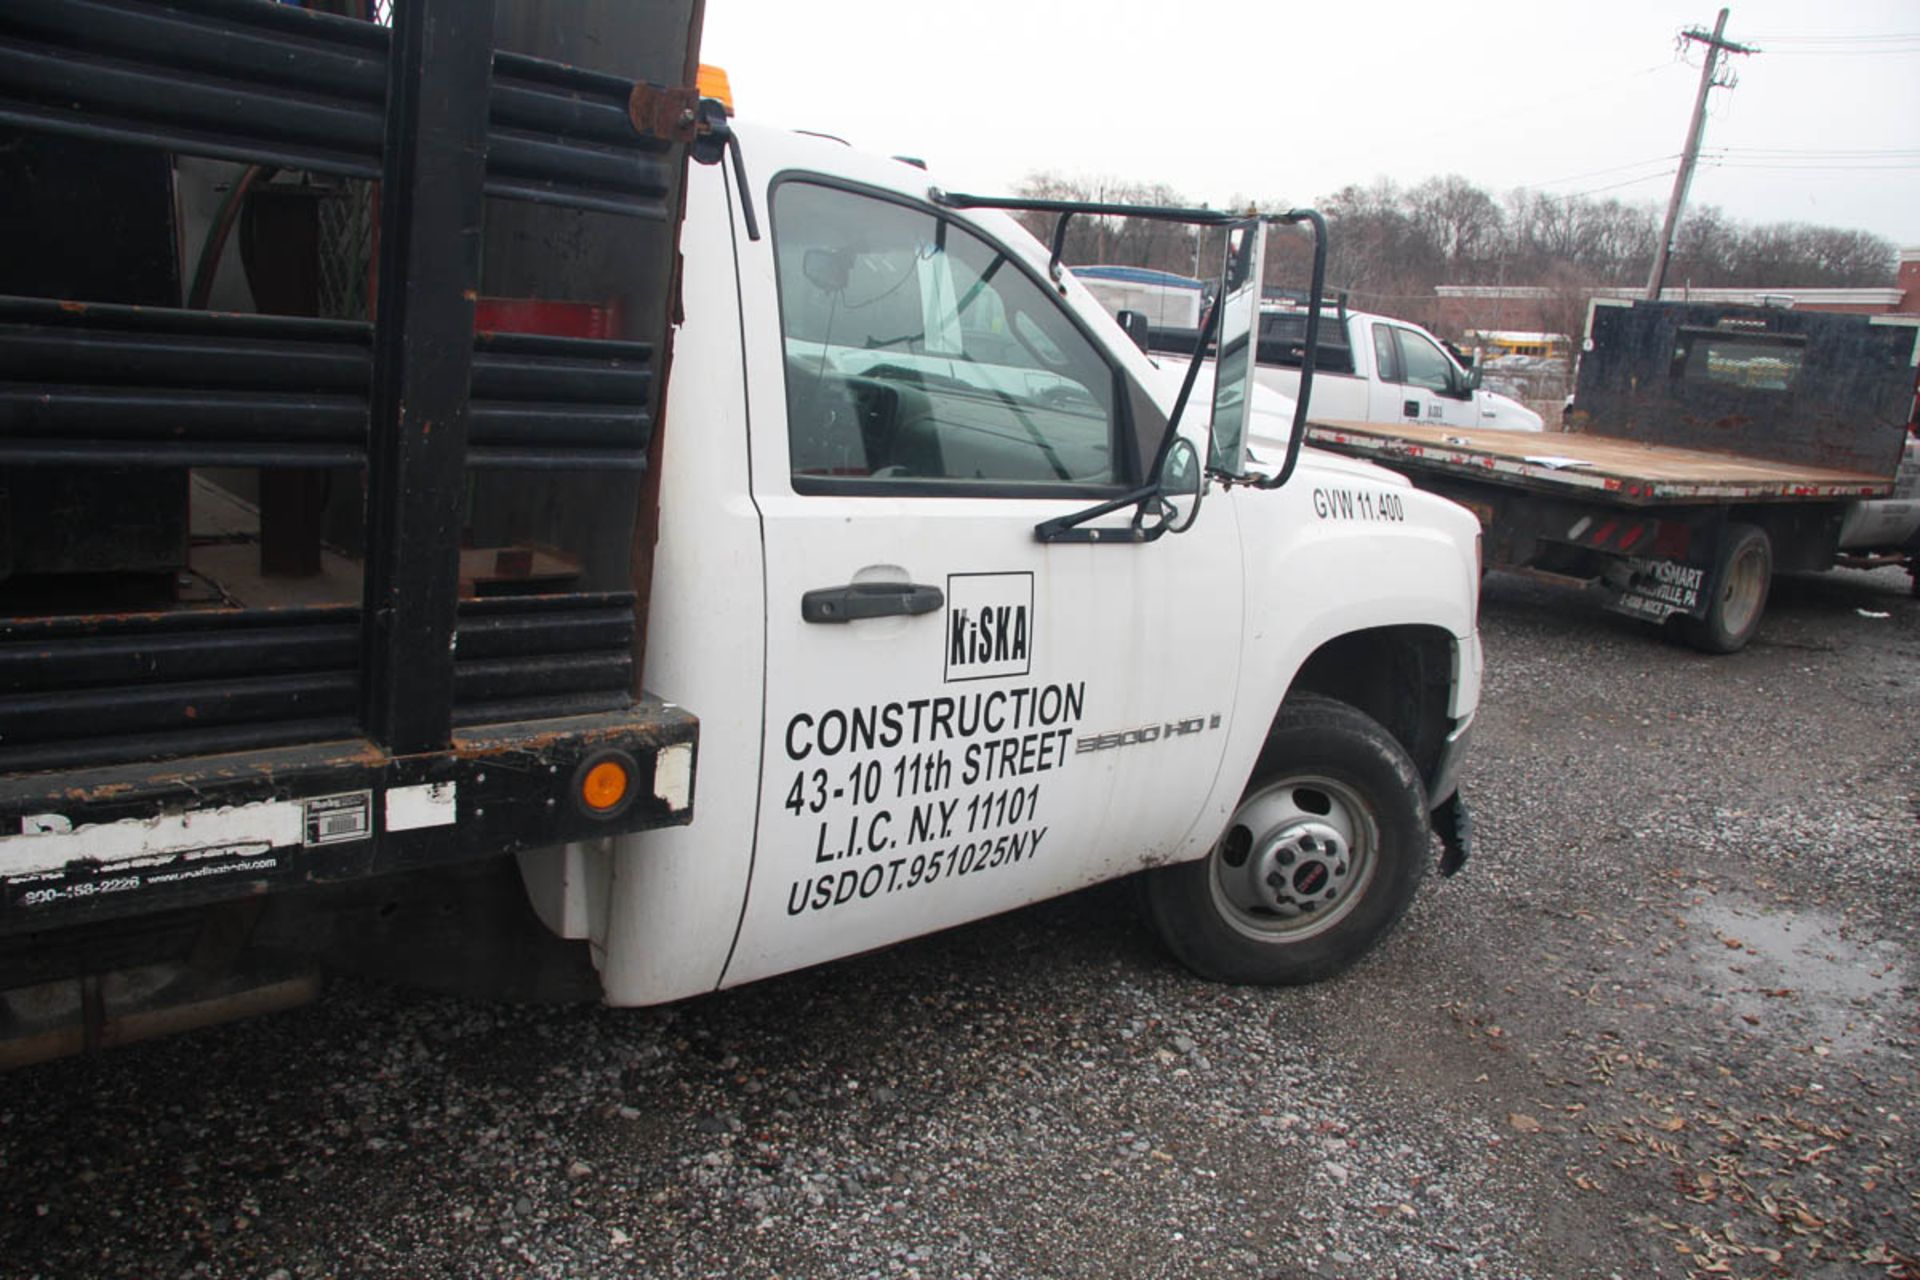 2007 GMC 3500HD 12' STAKE BODY TRUCK, AUTOMATIC, APPROXIMATELY 20,011 MILES, VIN: GDJC34K17E585253 - Image 9 of 19